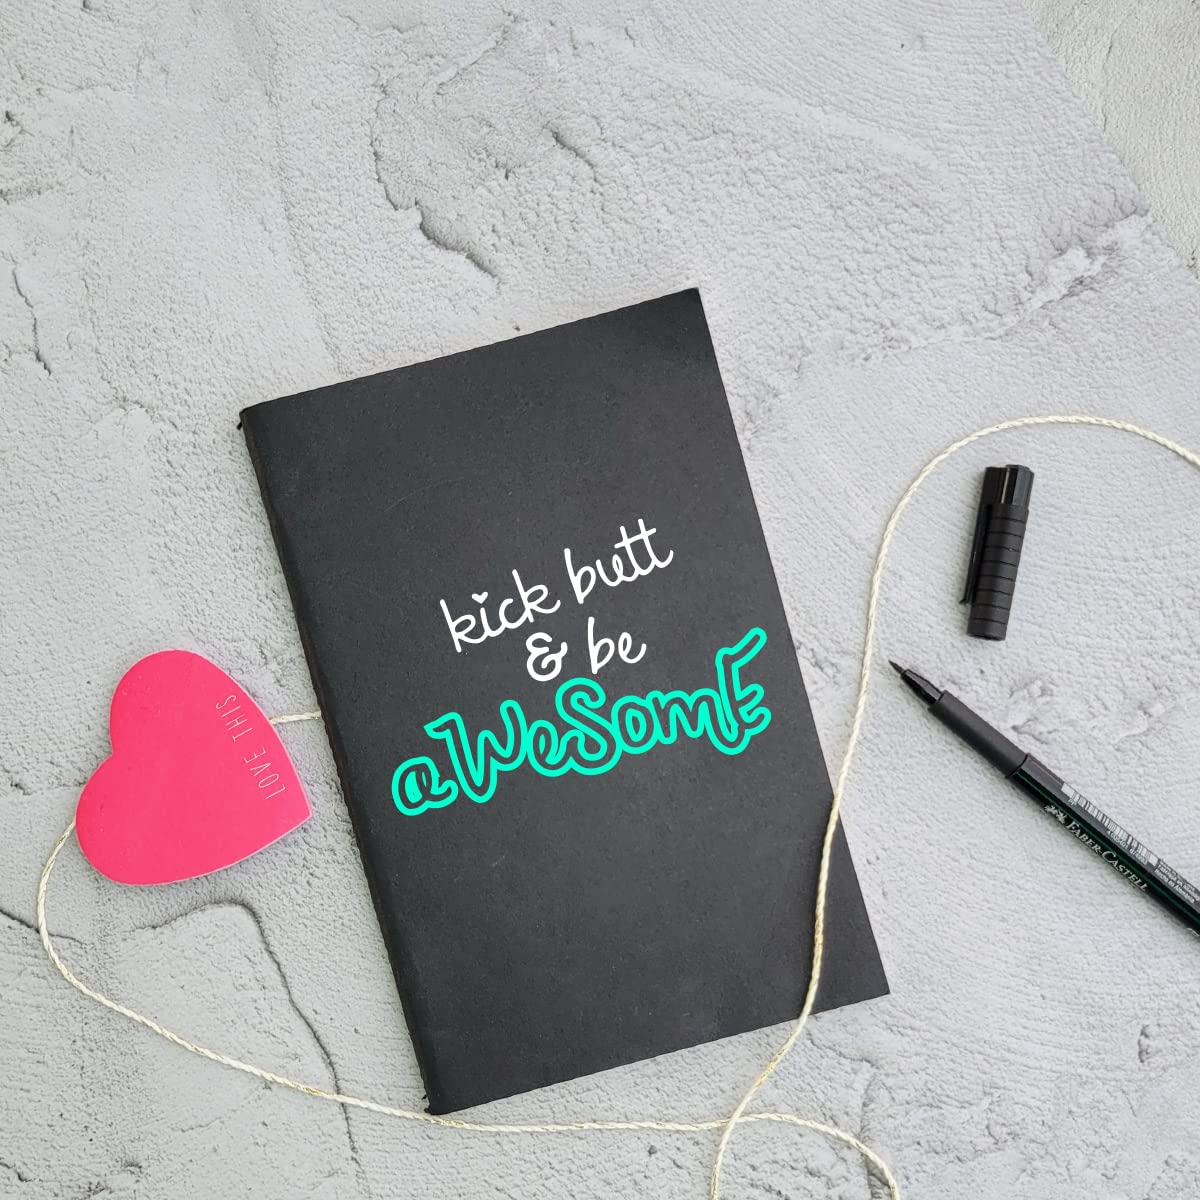 Be Awesome - Black A5 Doodle Notebook - Kraft Cover Notebook - A5 - 300 GSM Kraft Cover - Handmade - Unruled - 80 Pages - Natural Shade Pages 120 GSM - Funny Quotes & Quirky, Funky designs